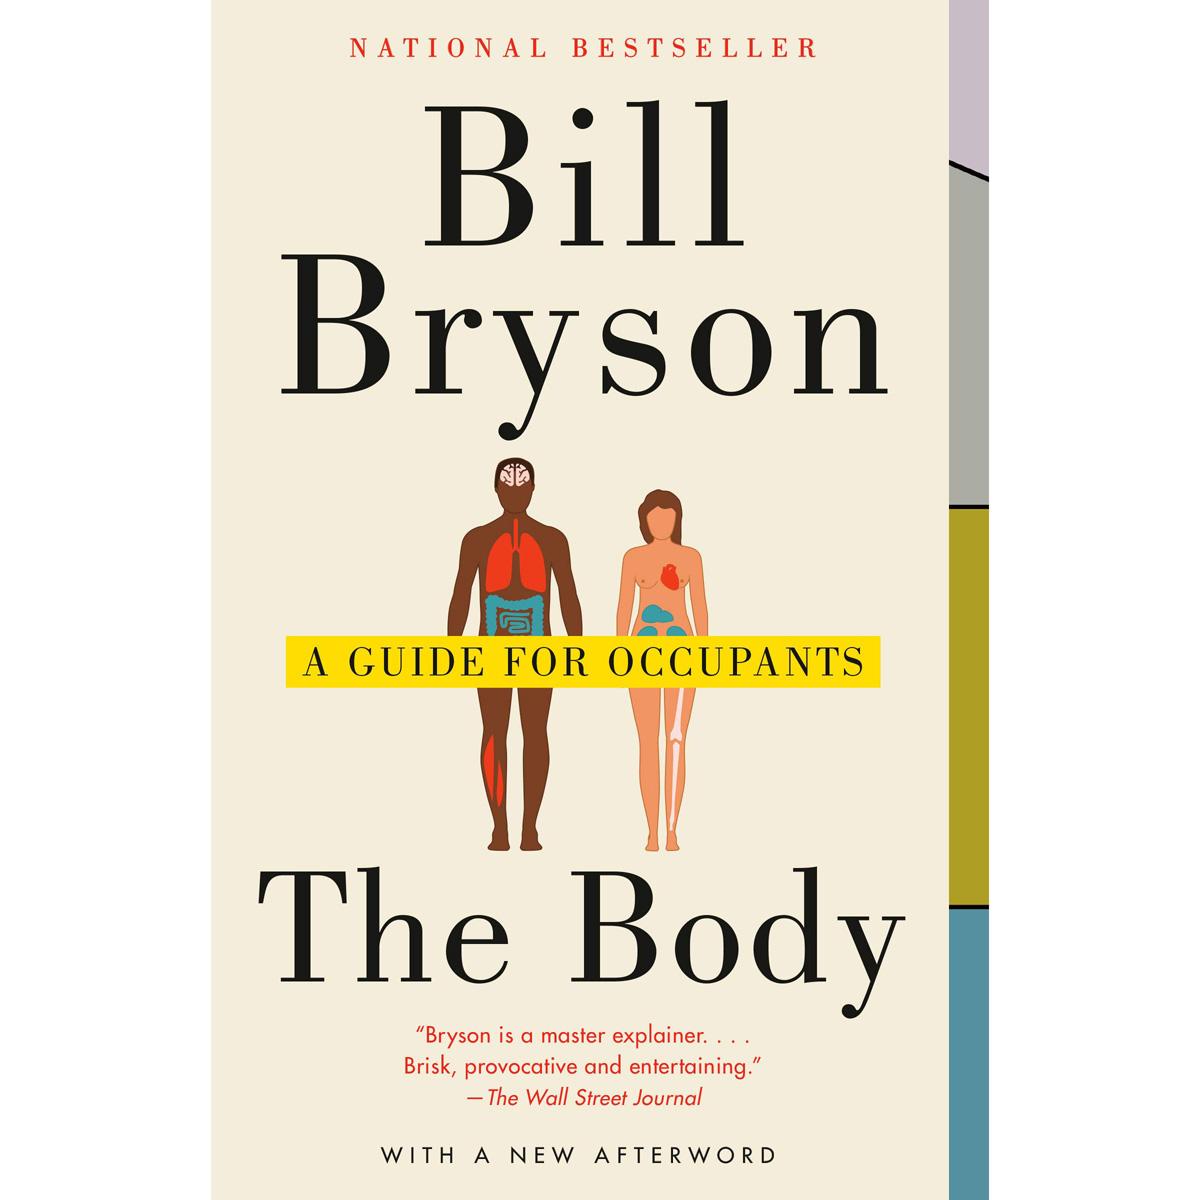 The Body A Guide for Occupants eBook for $1.99